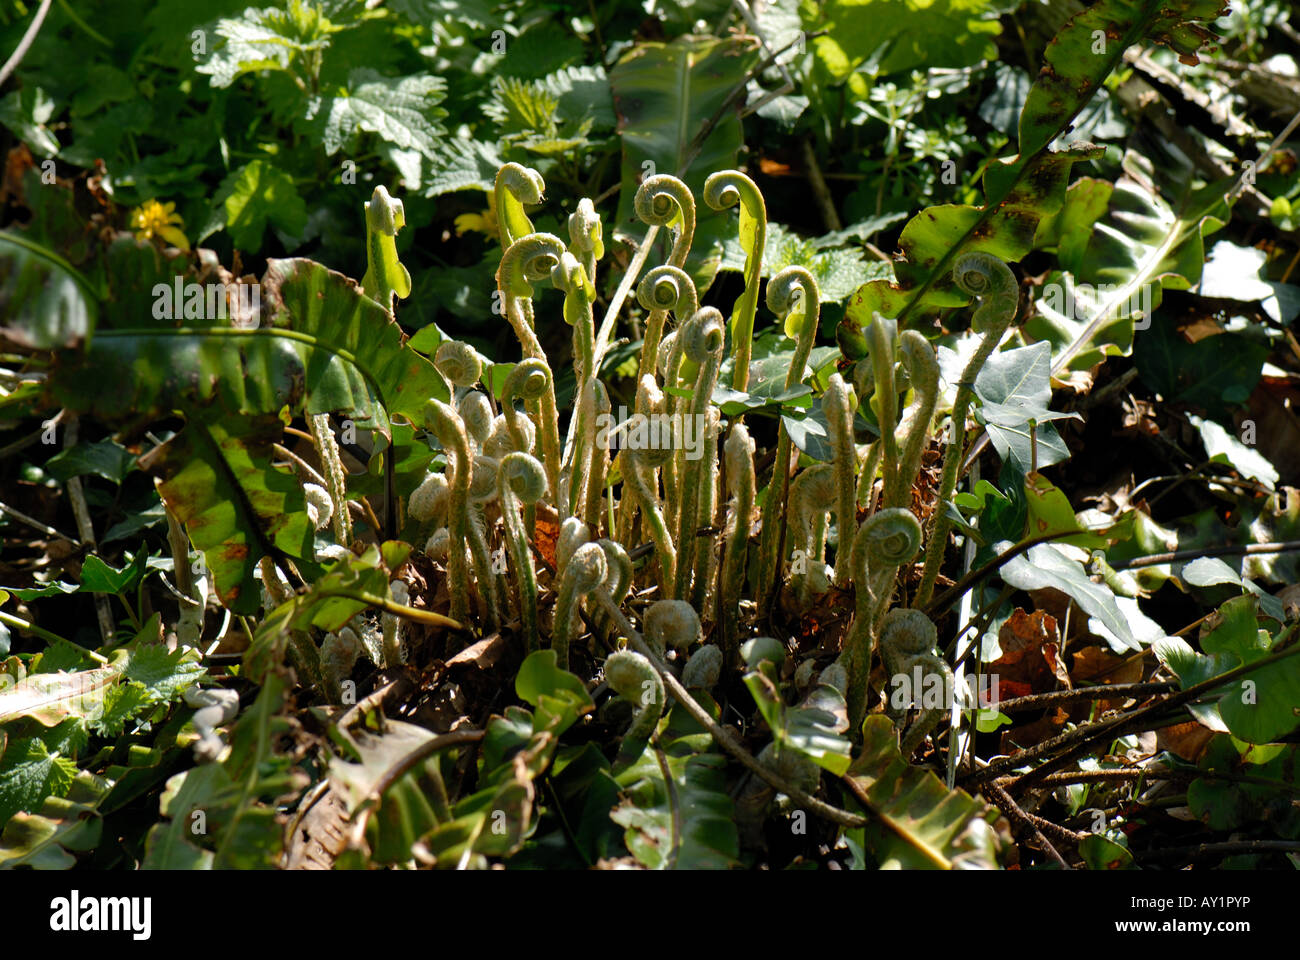 Harts tongue fern Asplenium scolopendrium young leaves uncurling in spring Stock Photo